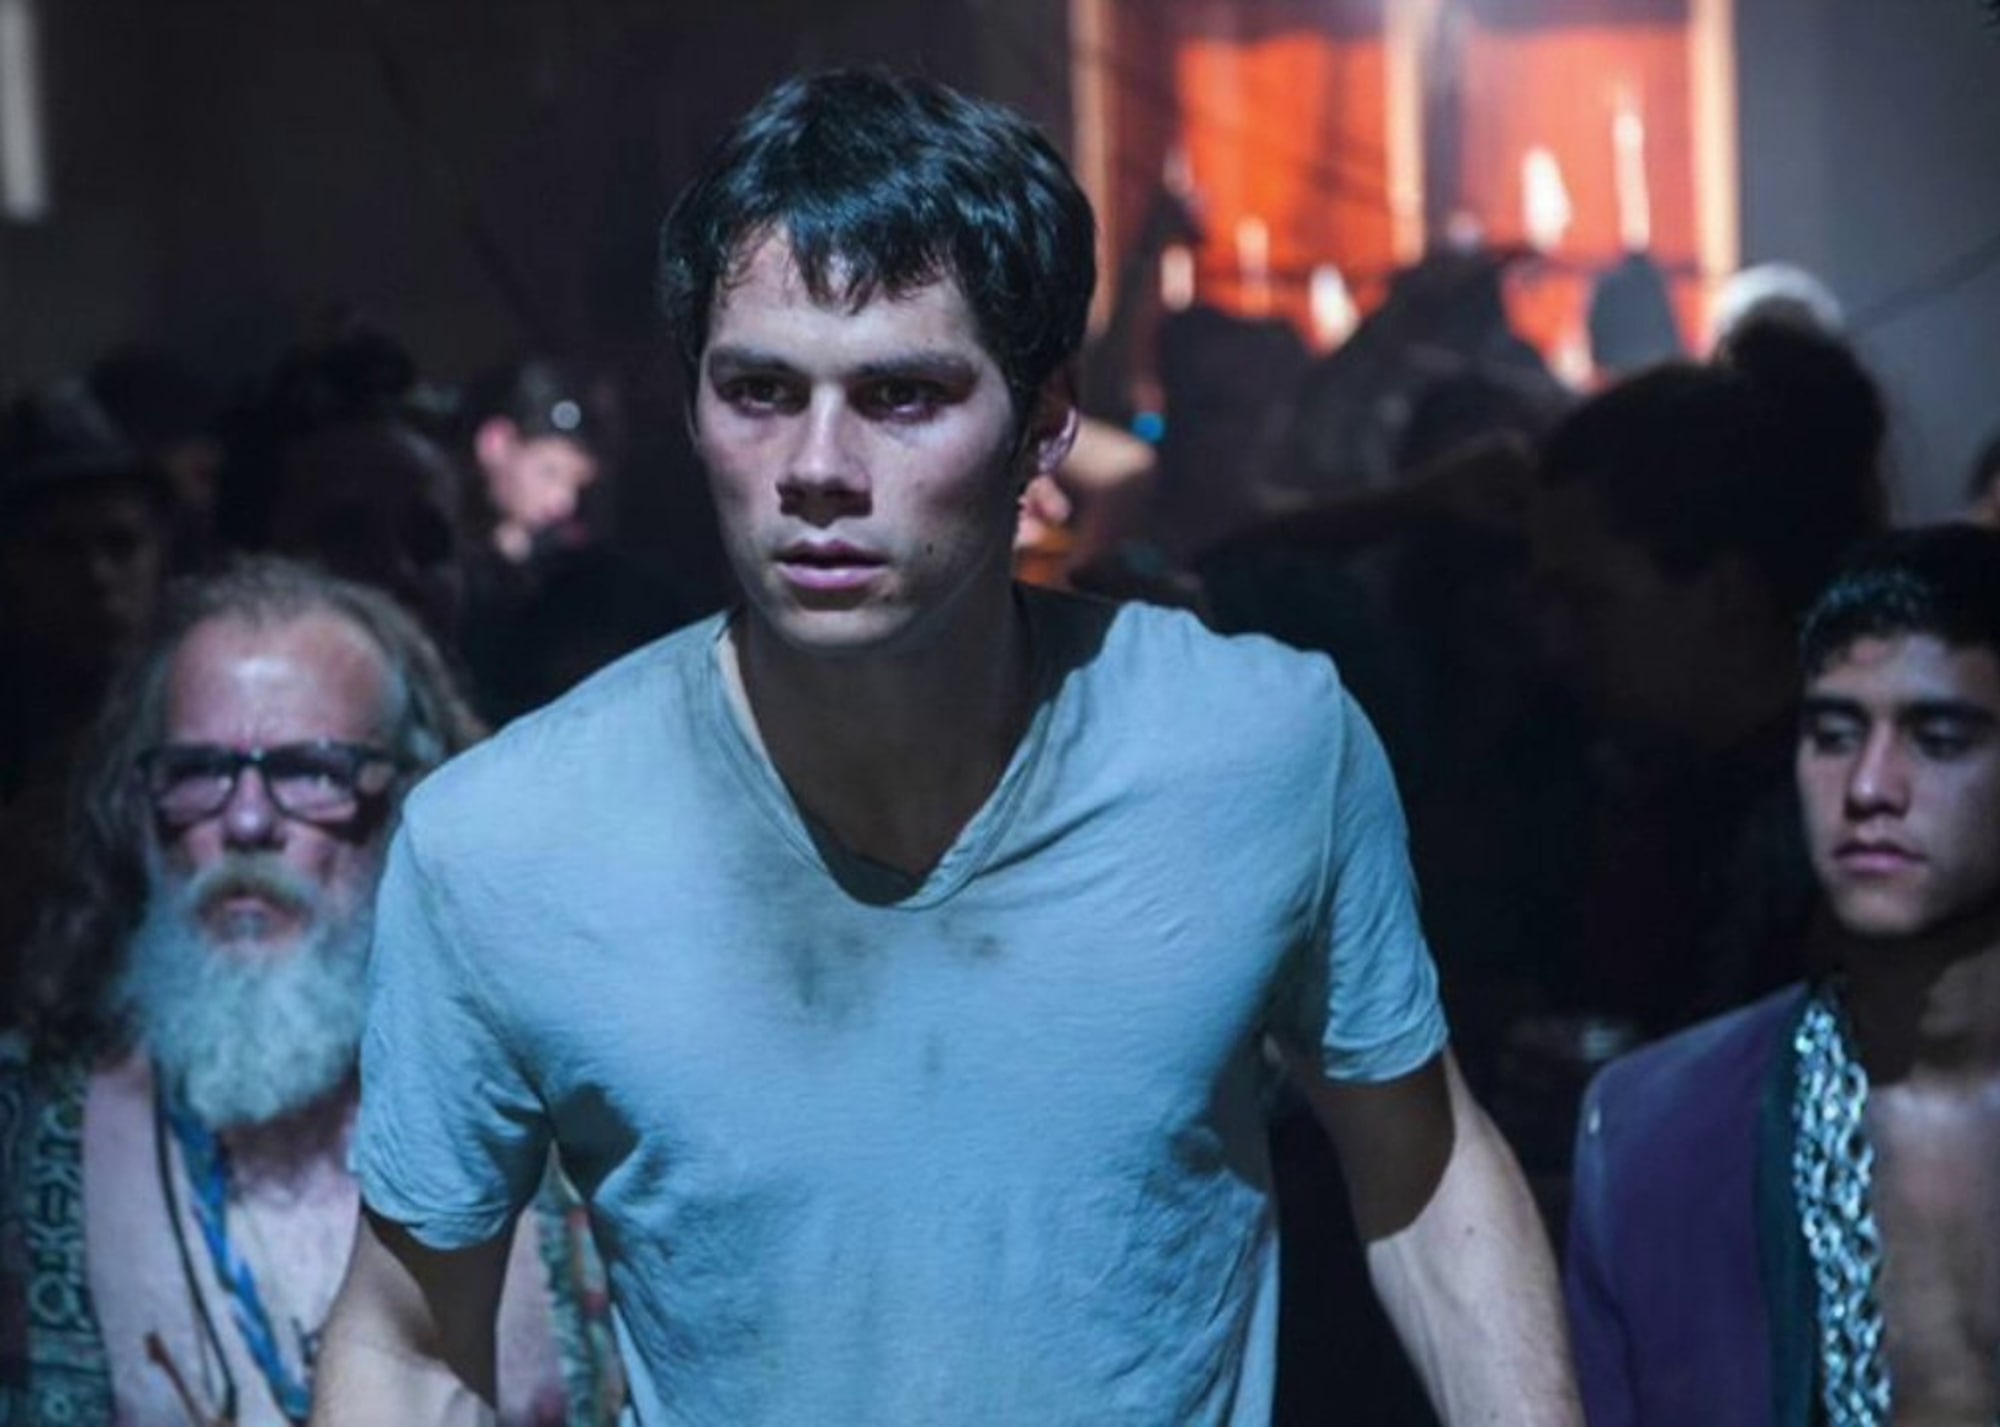 Reel Deal: The Maze Runner sequel fails to follow in footsteps of